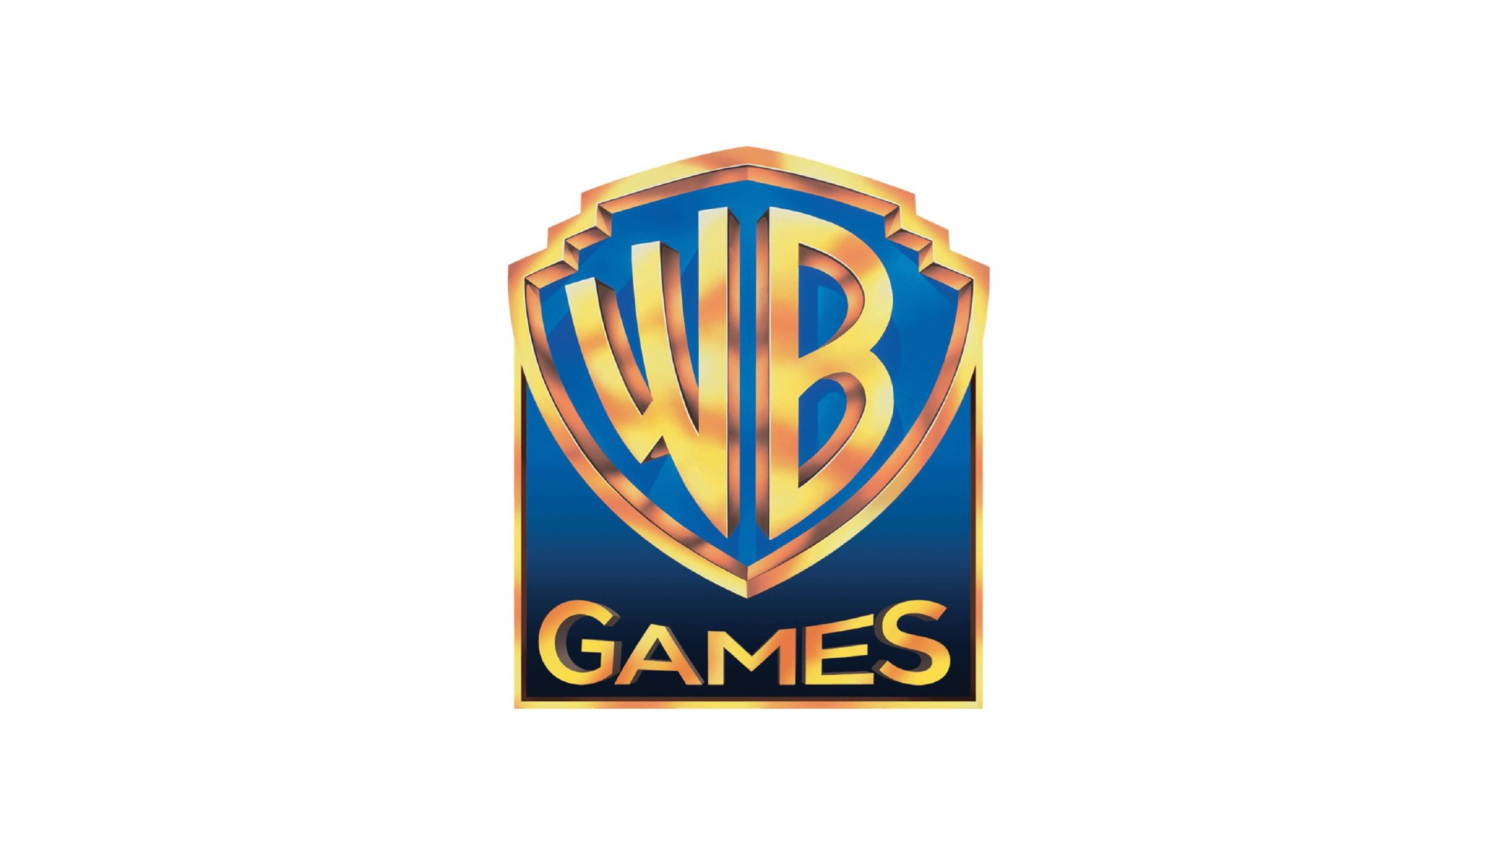 WB Games delivers strong operating margins and high ROIs, has been